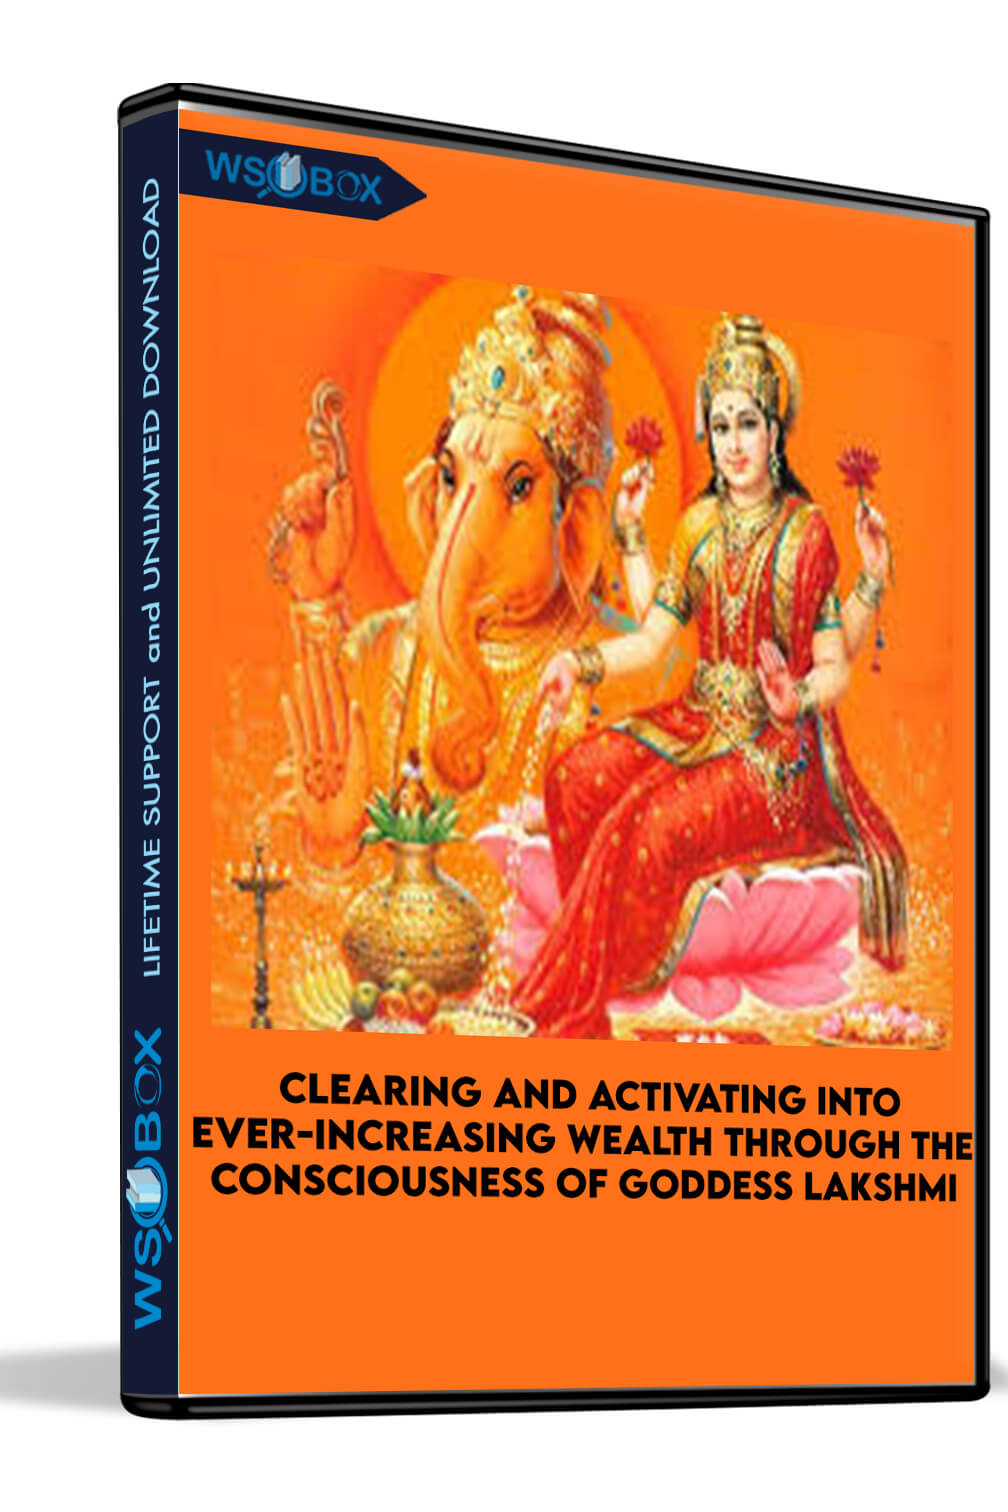 Clearing and Activating into Ever-Increasing Wealth through the Consciousness of Goddess Lakshmi